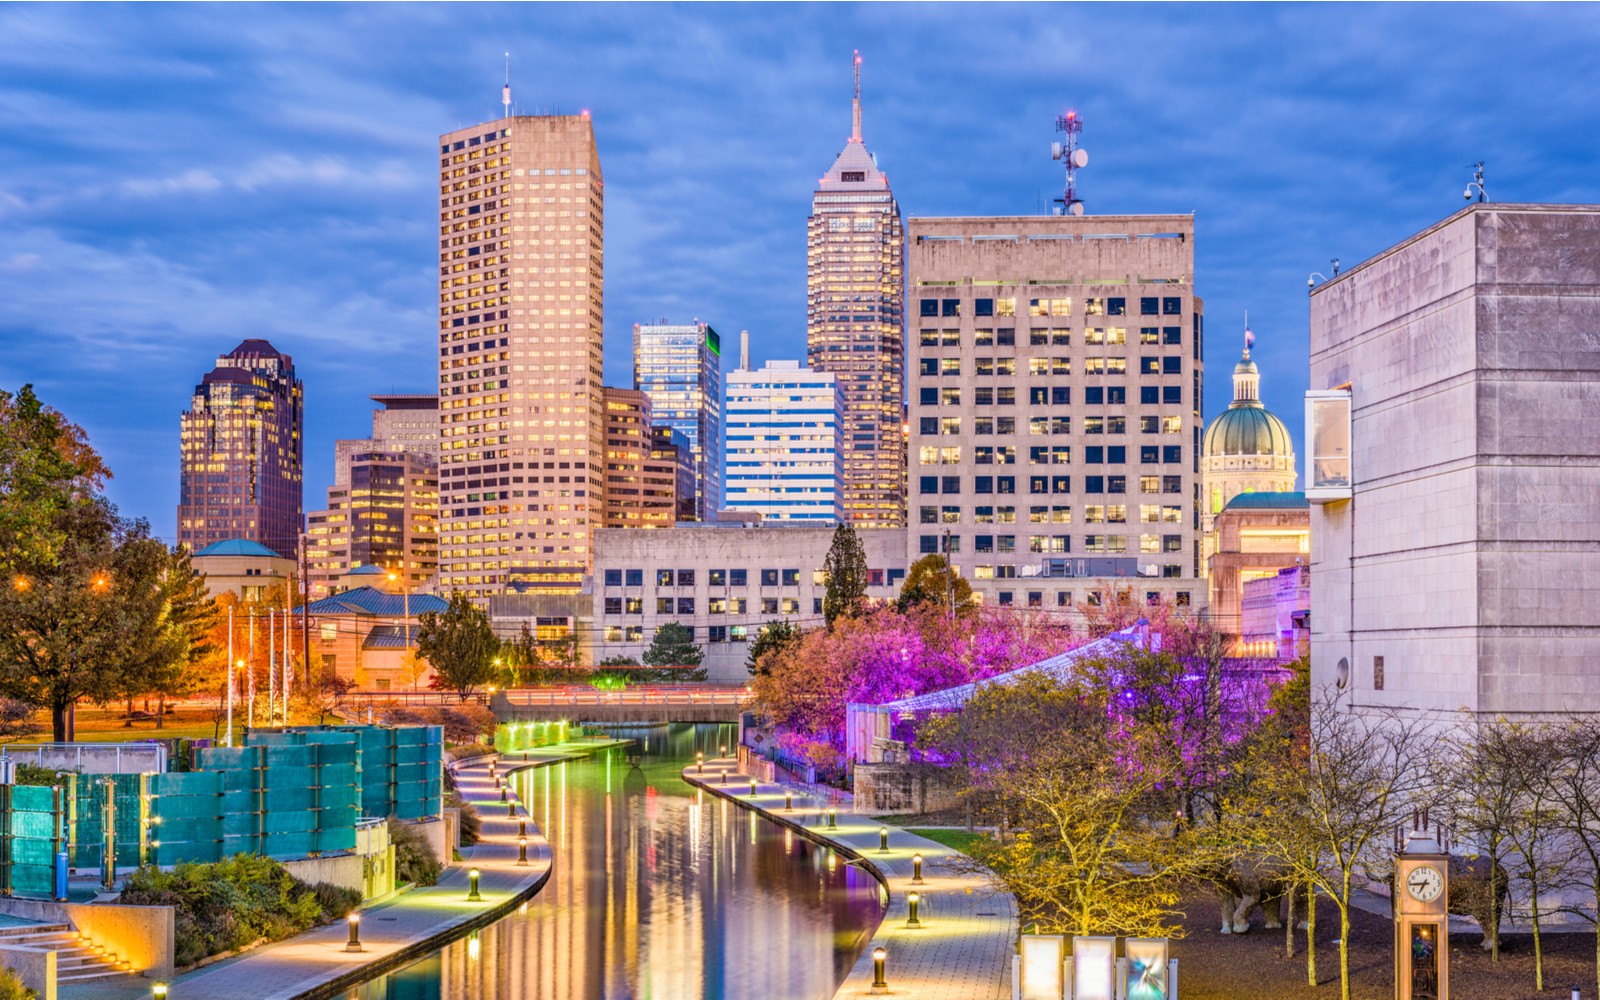 Is Indianapolis Safe? | Travel Tips & Safety Concerns